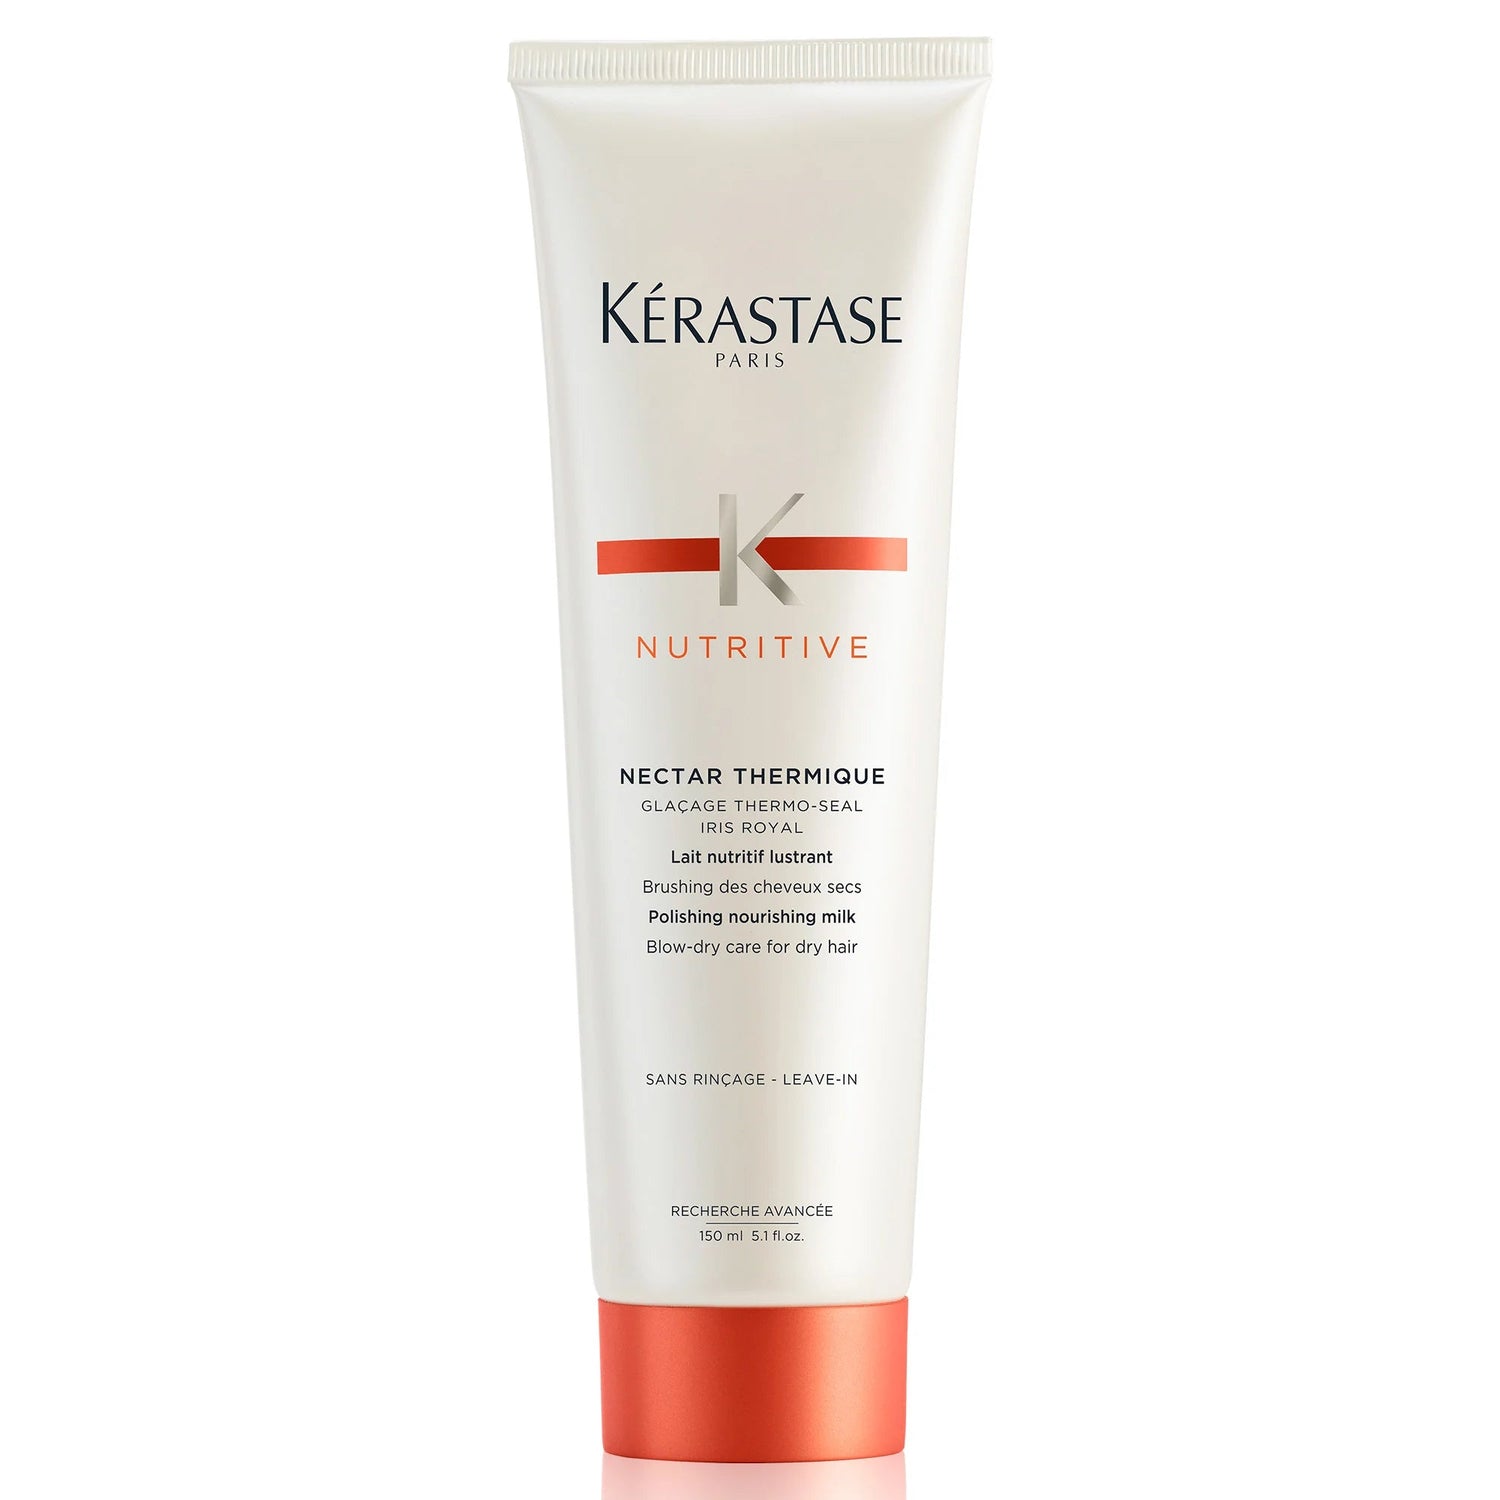 Nutritive Nectar Thermique Blow Dry Primer - Pearl Skin Studio